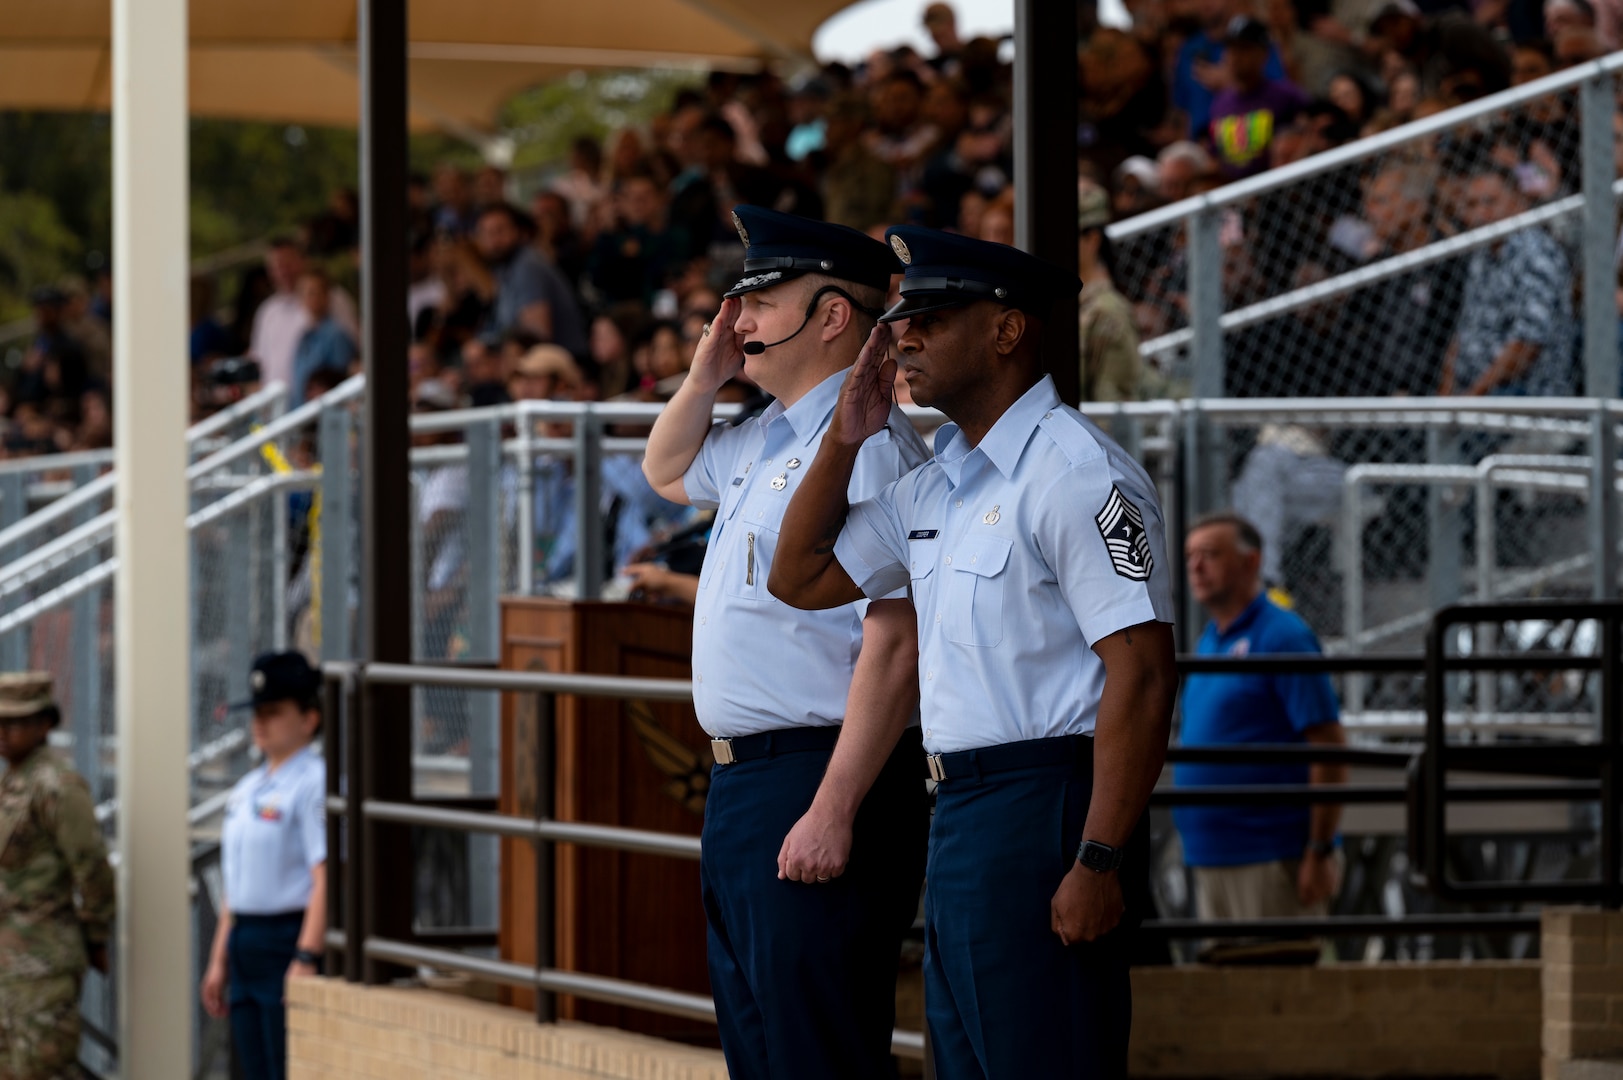 Col. Power and Chief Cooper are seen saluting